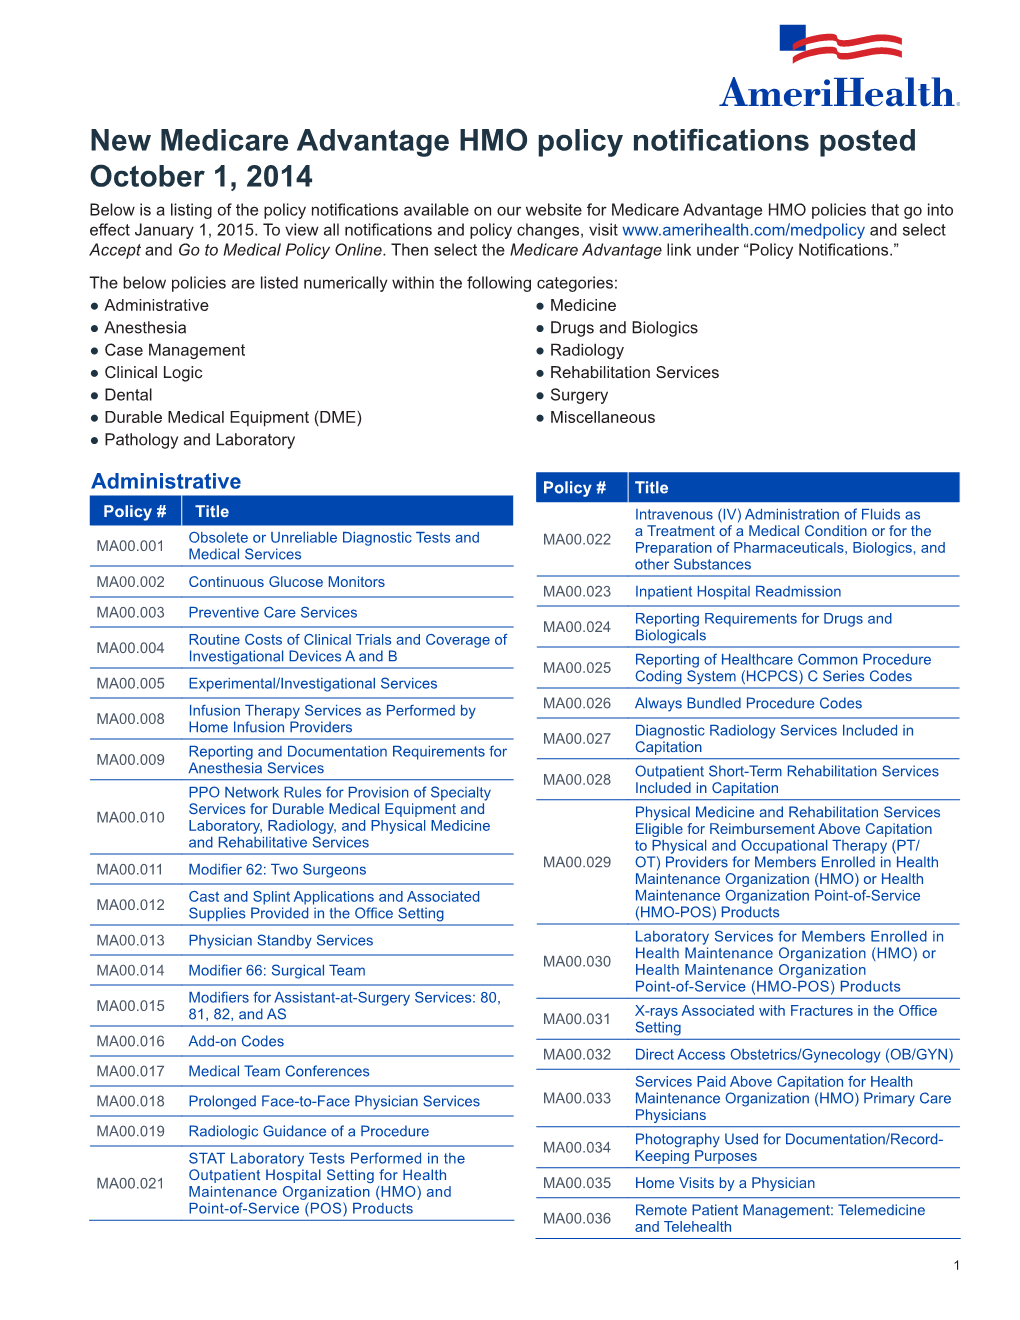 New Medicare Advantage HMO Policy Notifications Posted October 1, 2014